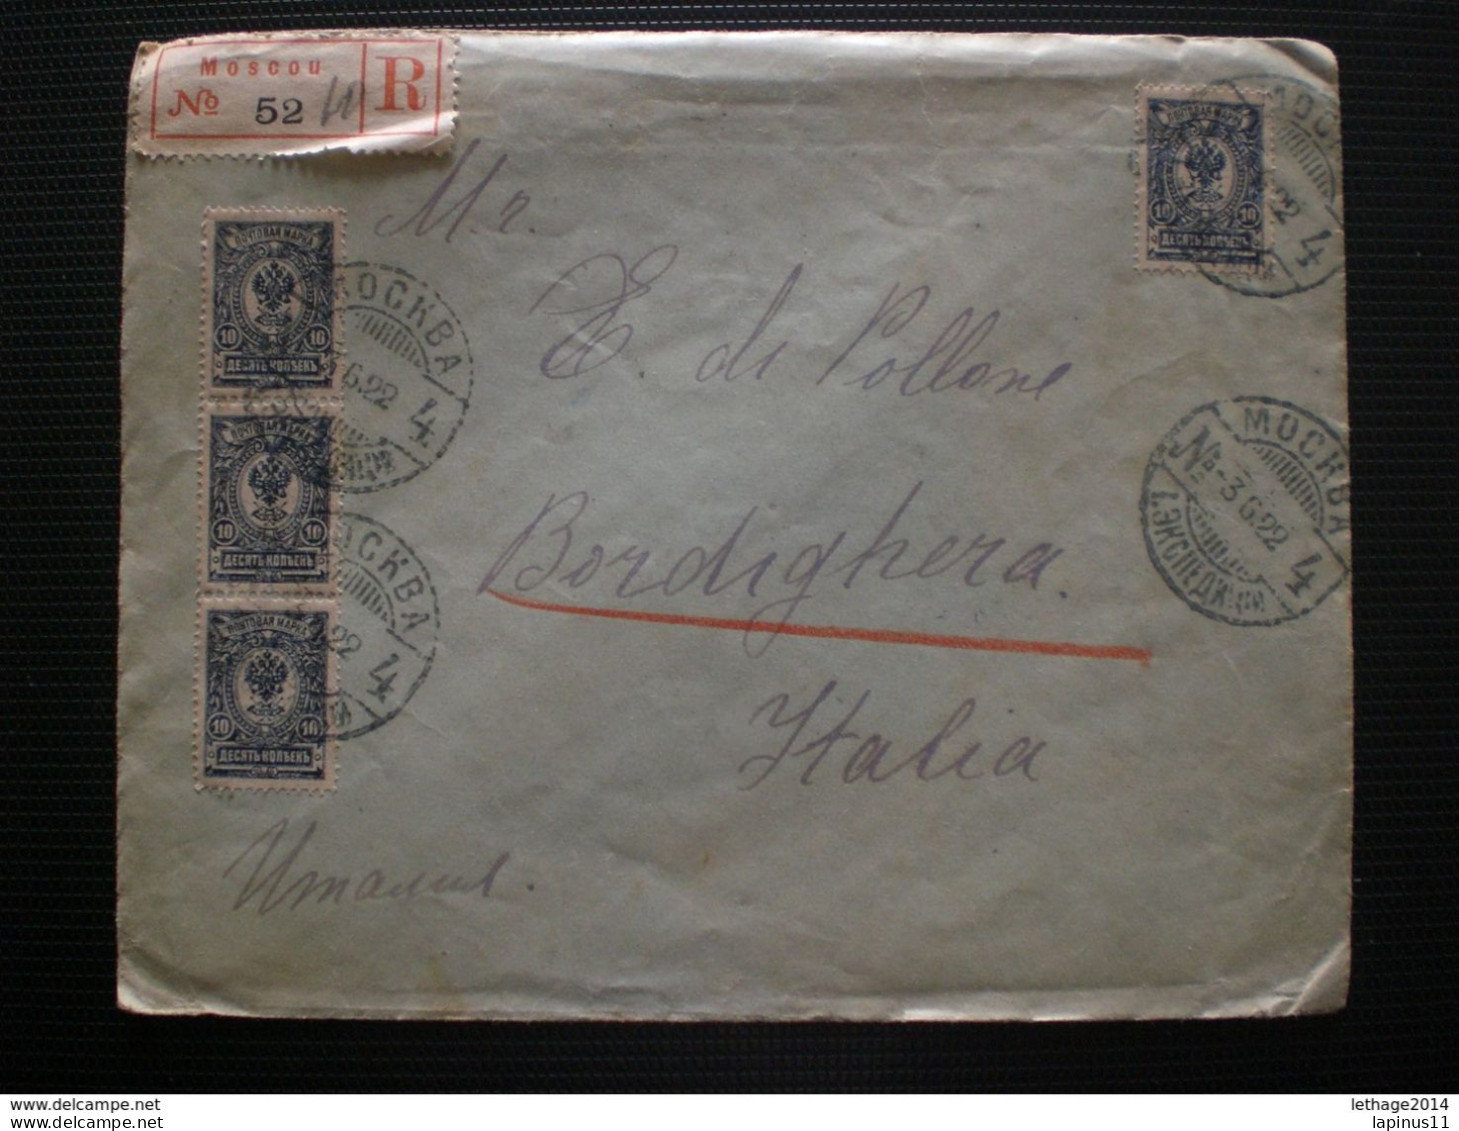 RUSSIA RUSSIE РОССИЯ STAMPS COVER 1922 REGISTER MAIL RUSSIE TO ITALY RRR RIF.TAGG. (78) - Storia Postale